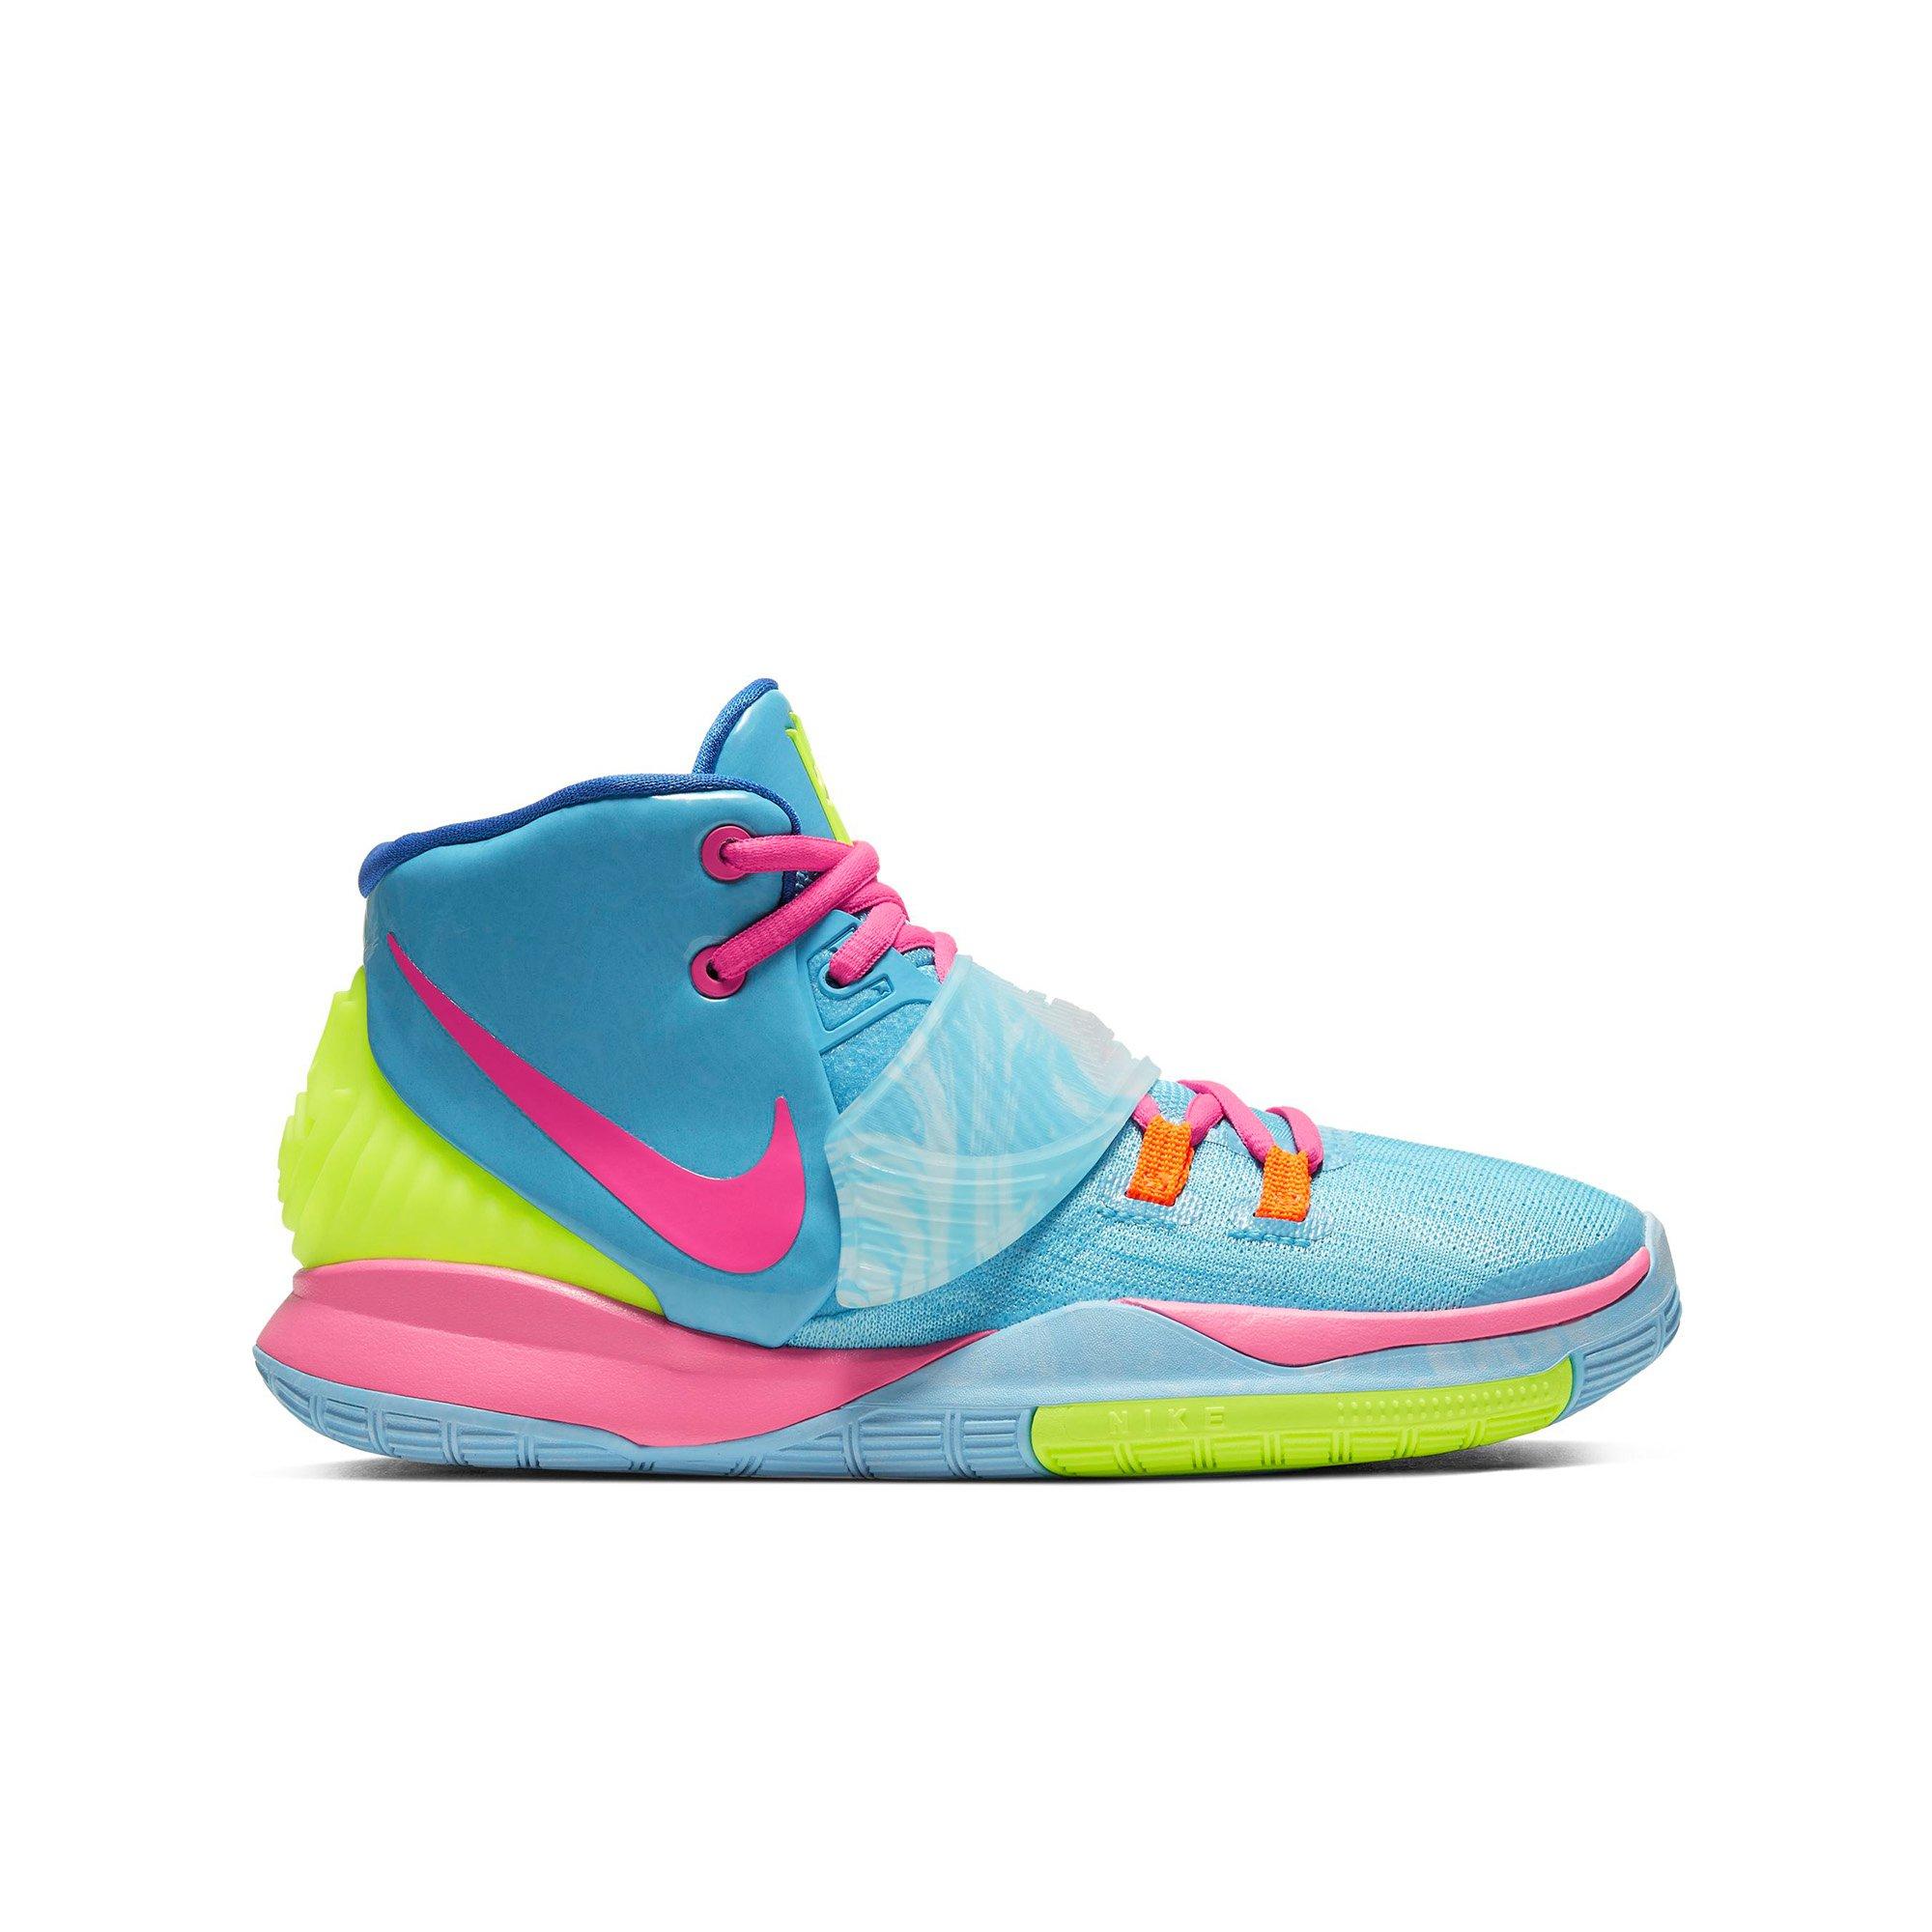 kyrie shoes for girls